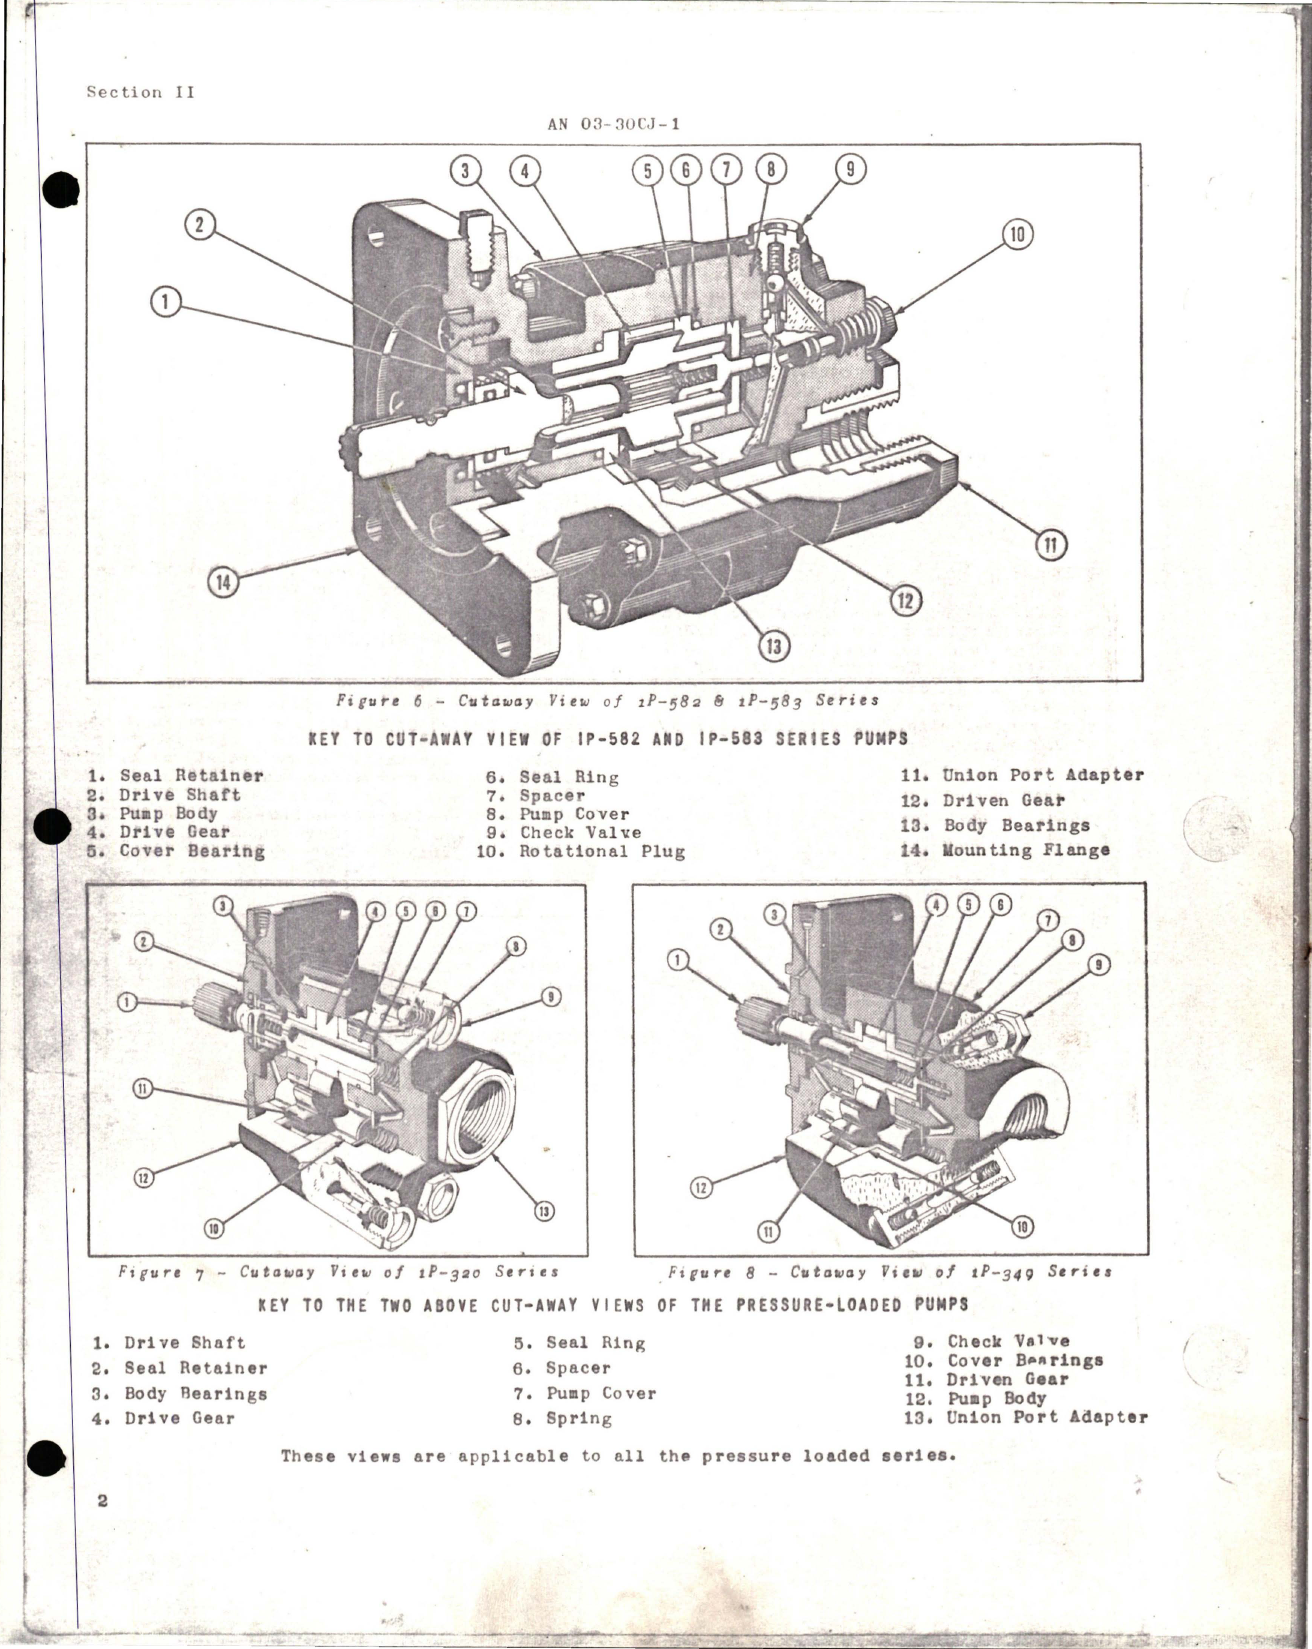 Sample page 7 from AirCorps Library document: Operation, Service and Overhaul Instructions with Parts Catalog for Gear Type Hydraulic Pumps 